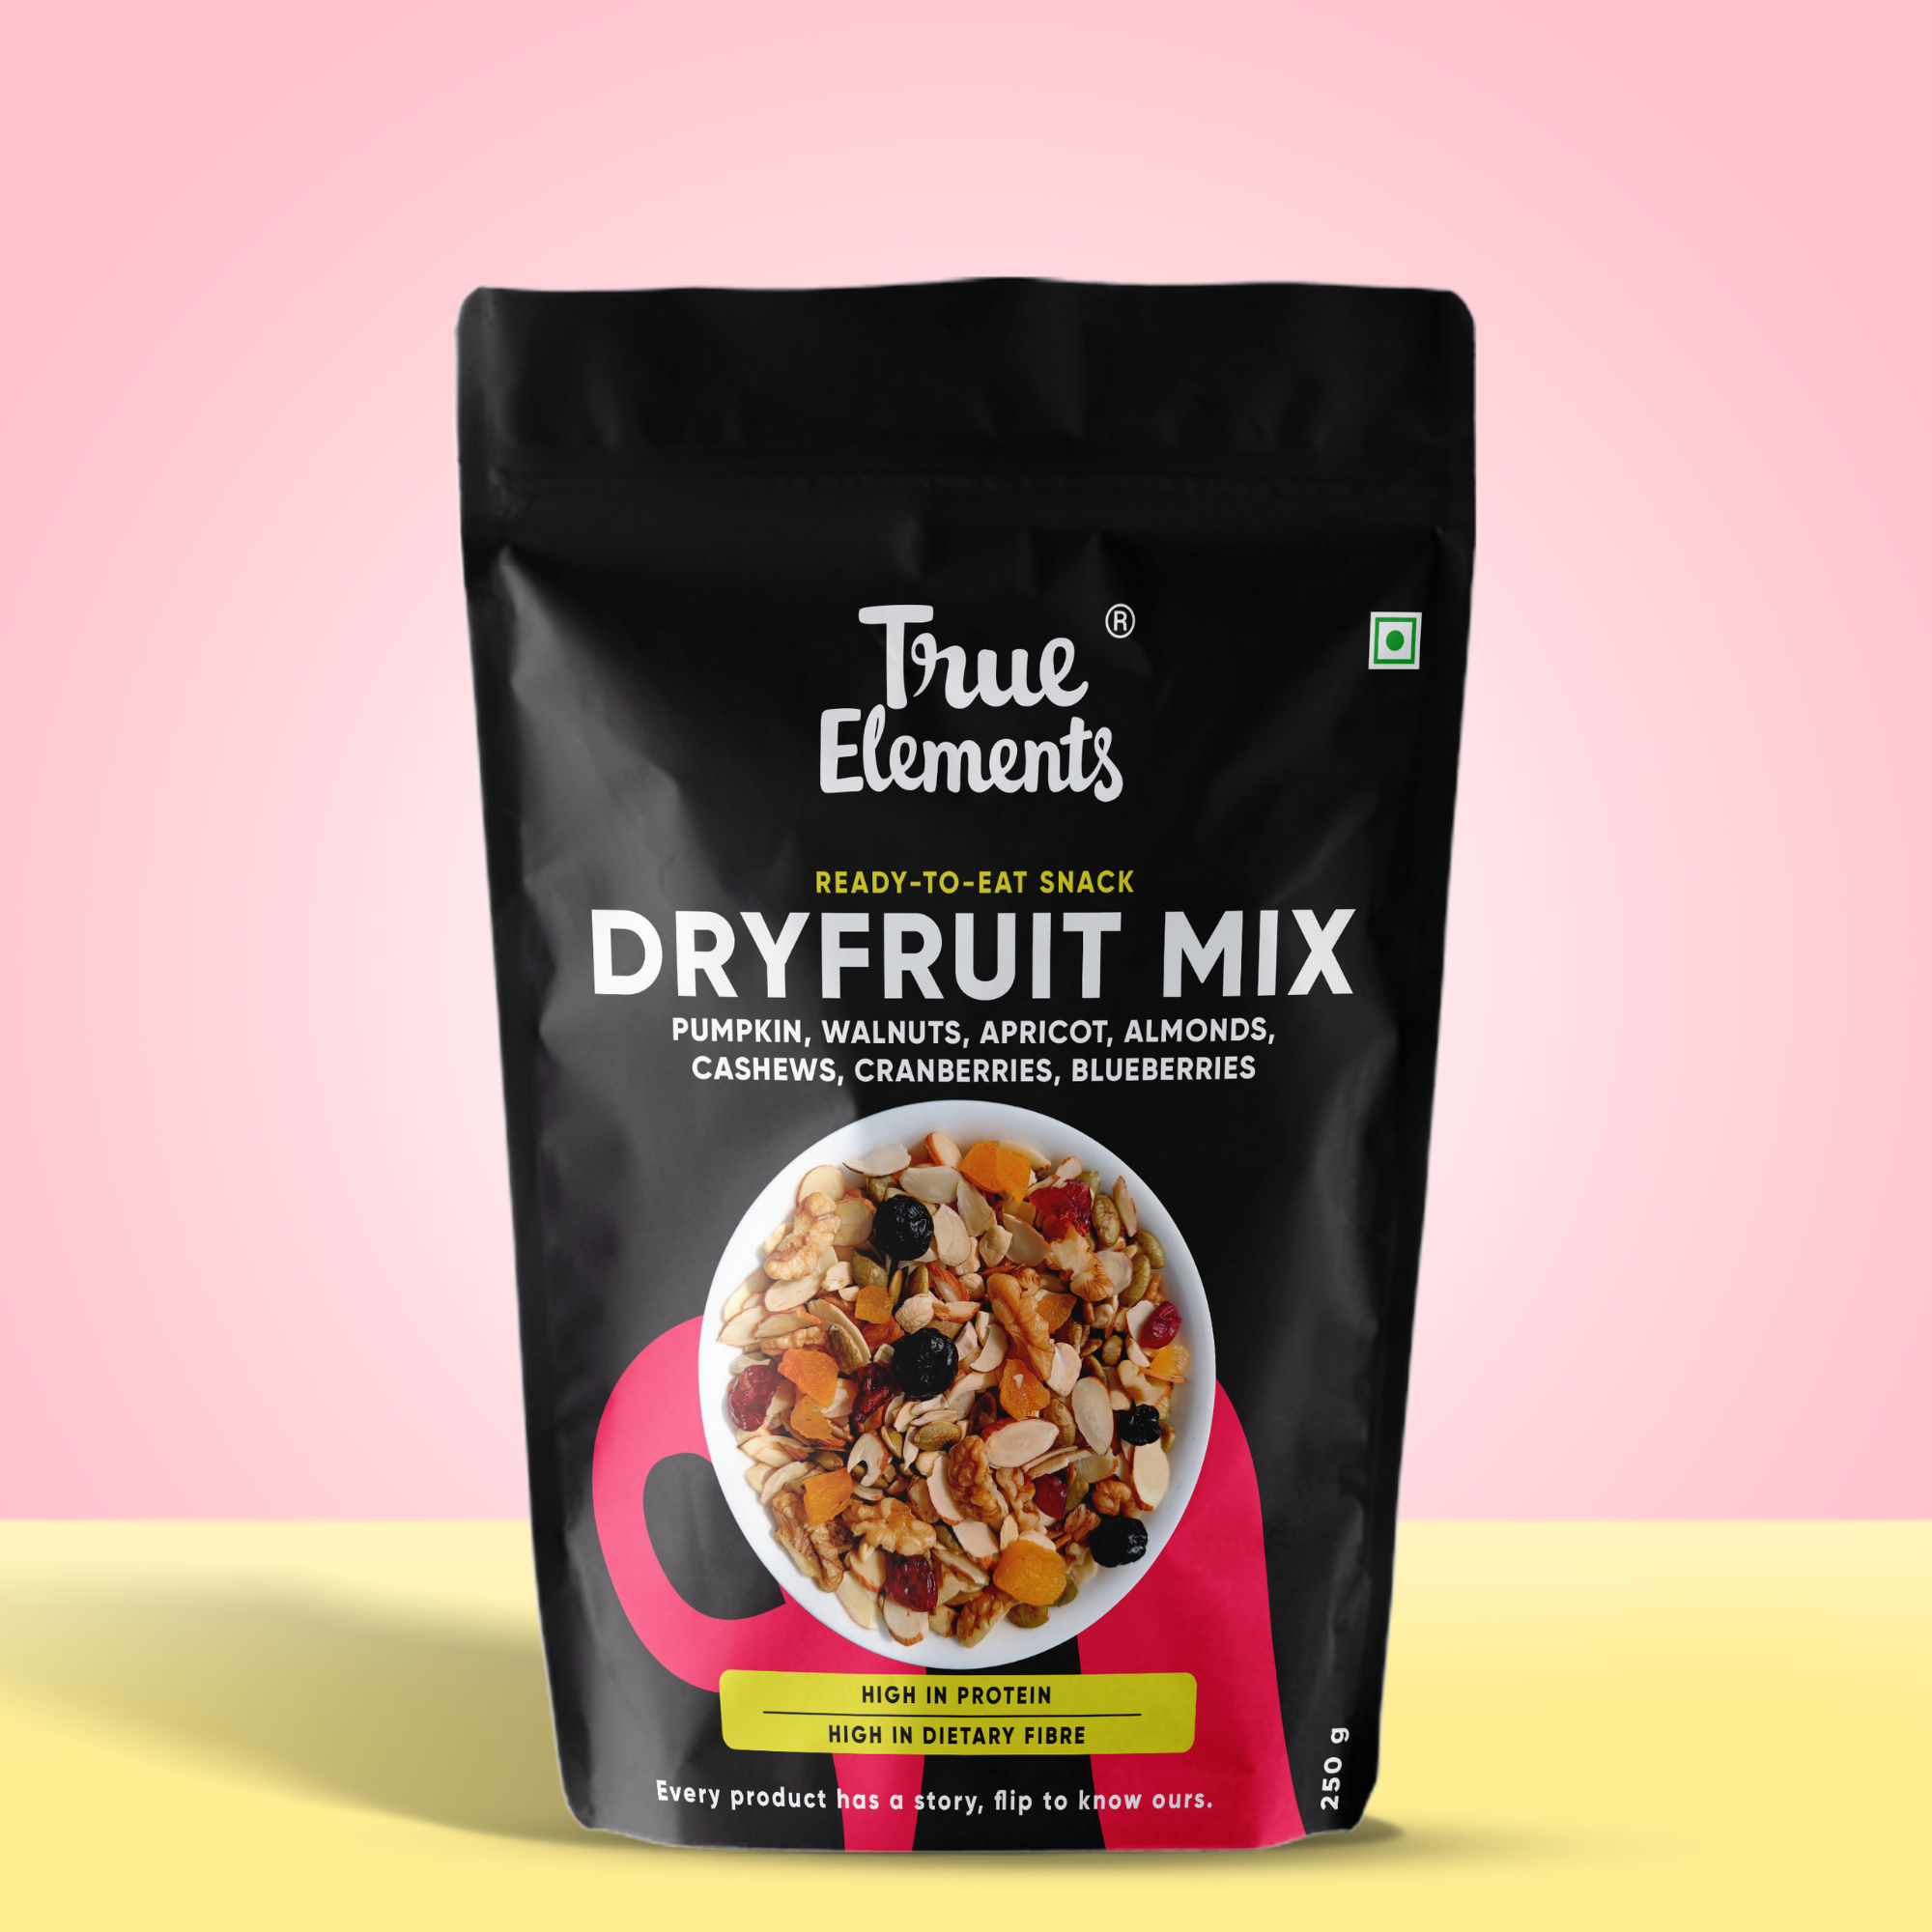 True elements dryfruit mix consisting of pumpkin, walnuts, apricot, almonds, cashews, cranberries, blueberries in a 500g pouch.